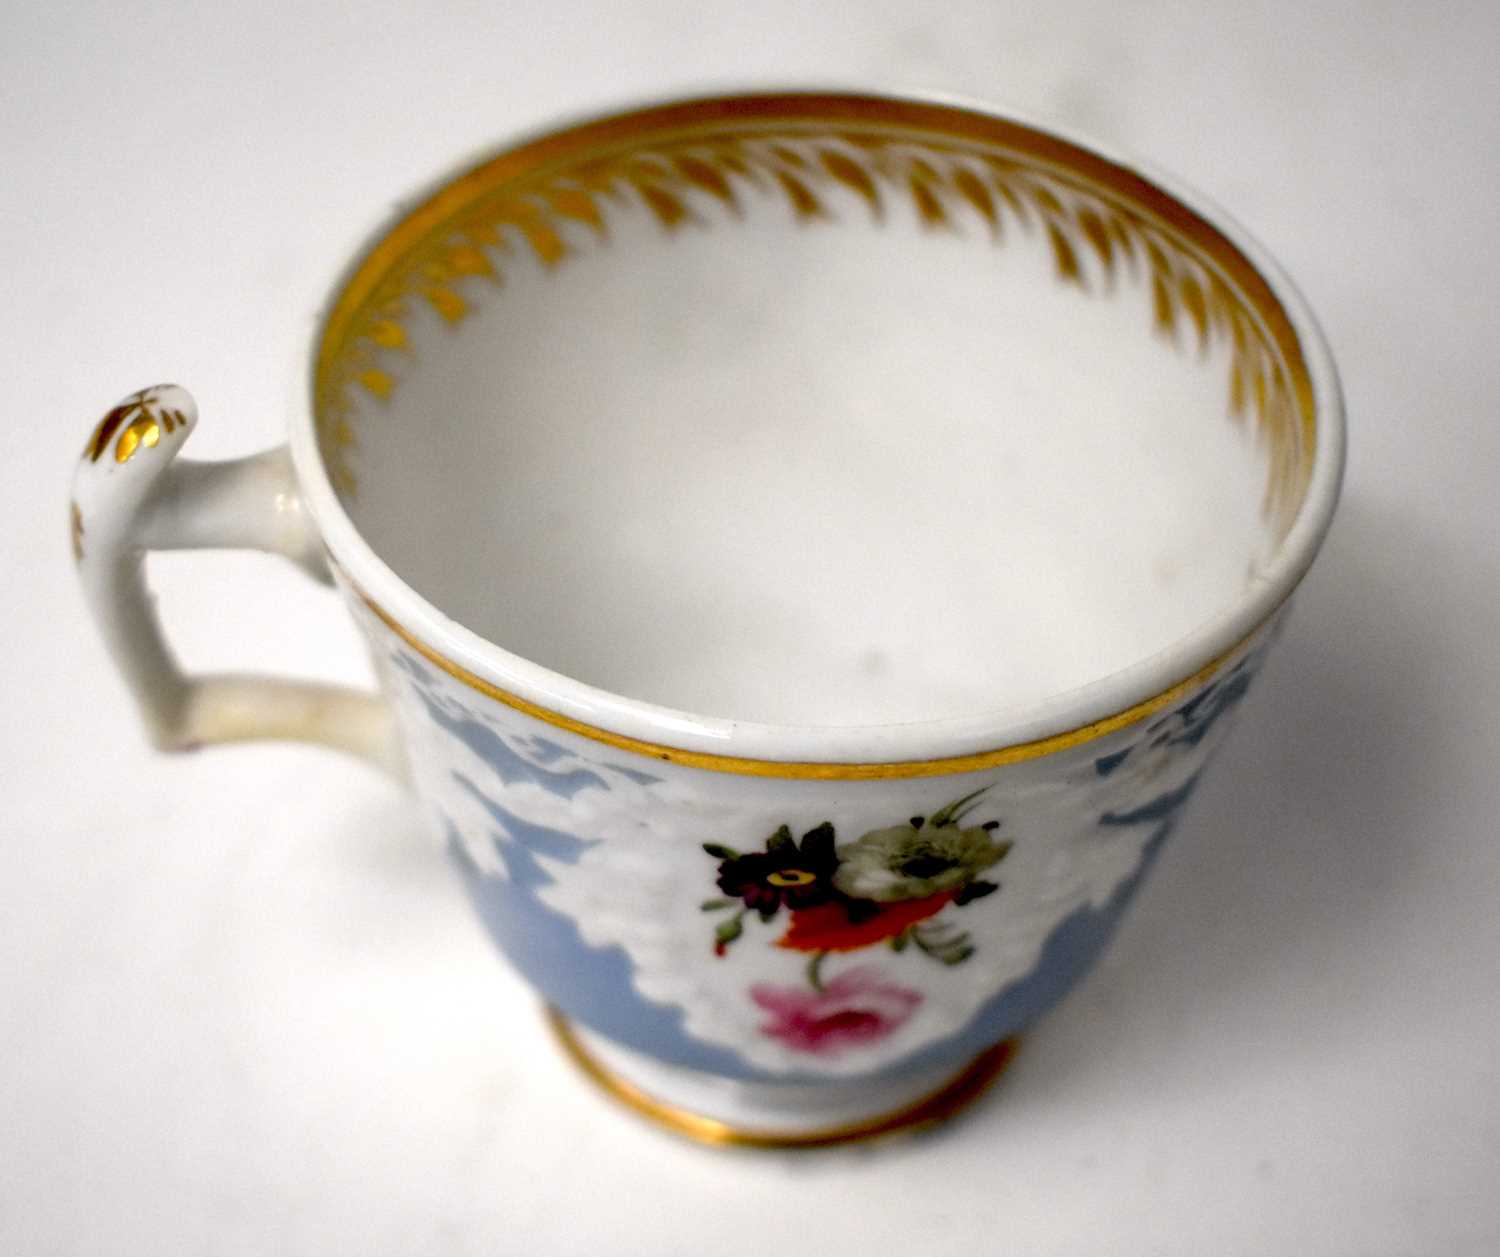 AN EARLY 19TH CENTURY CHAMBERLAINS WORCESTER PART TEASET painted with floral sprays, under a moulded - Image 36 of 36